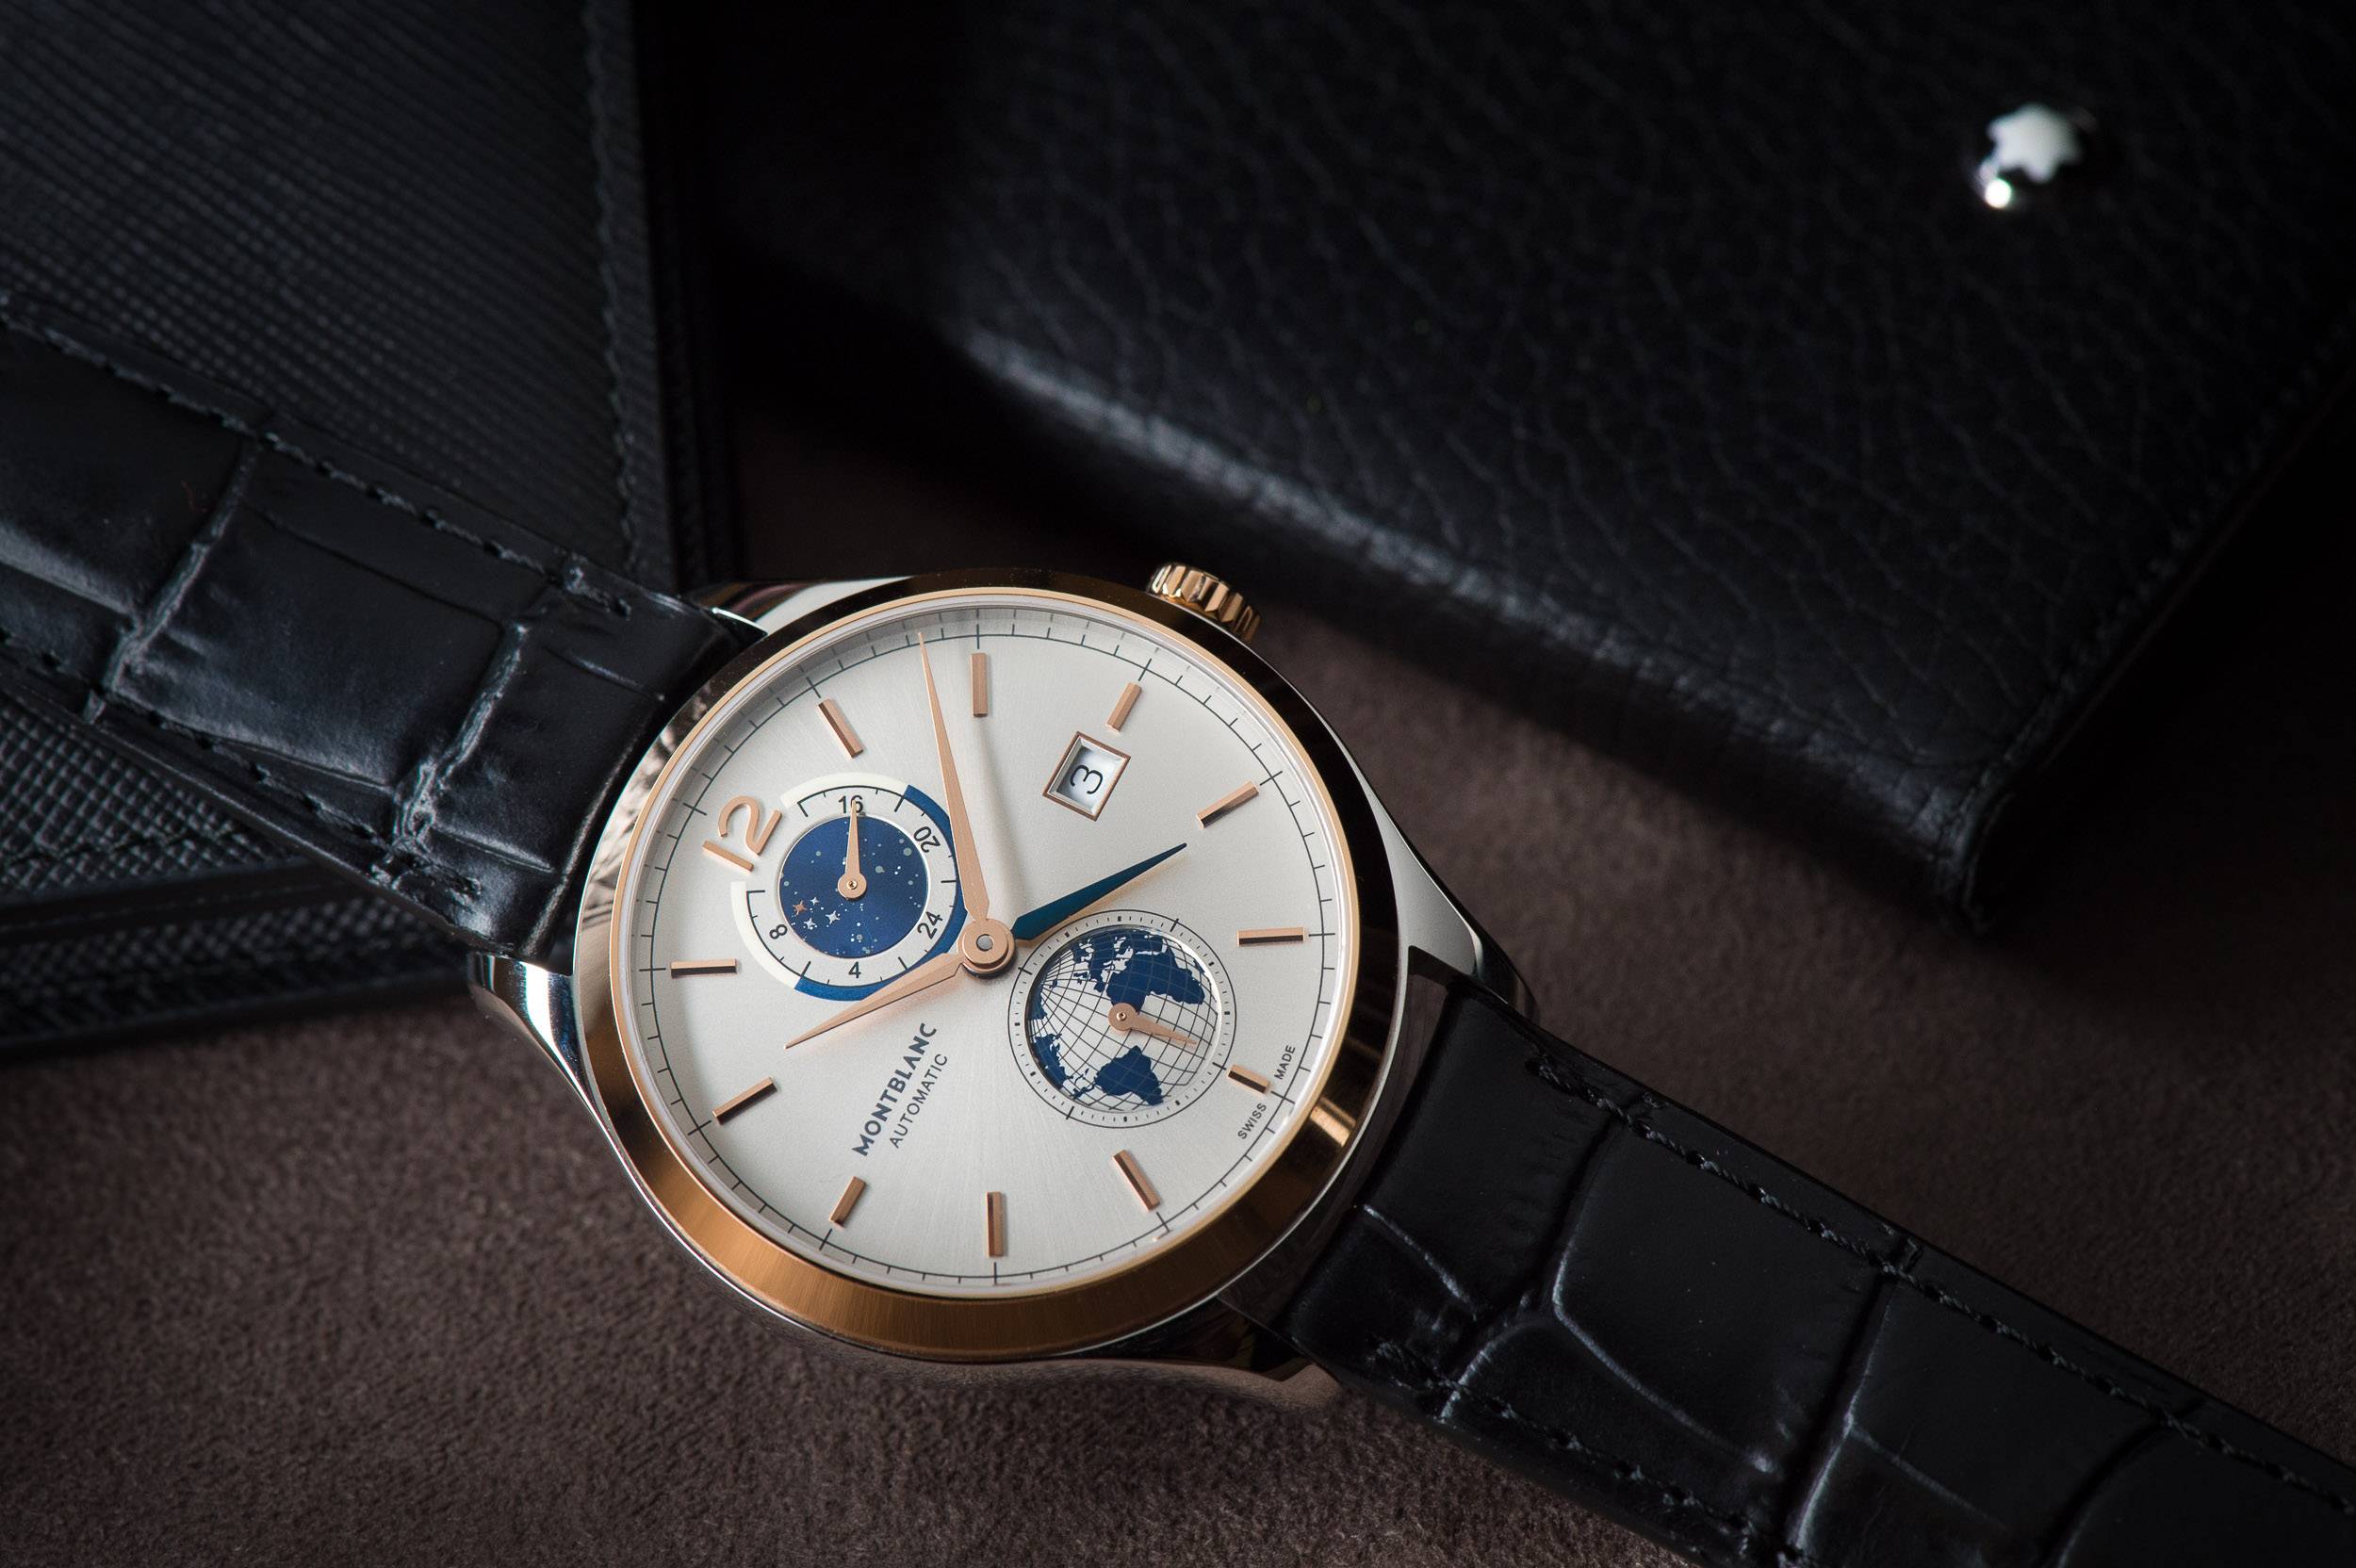 Montblanc Heritage Chronométrie Dual Time Vasco da Gama Limited Edition 238 Watches And Wonders Feature